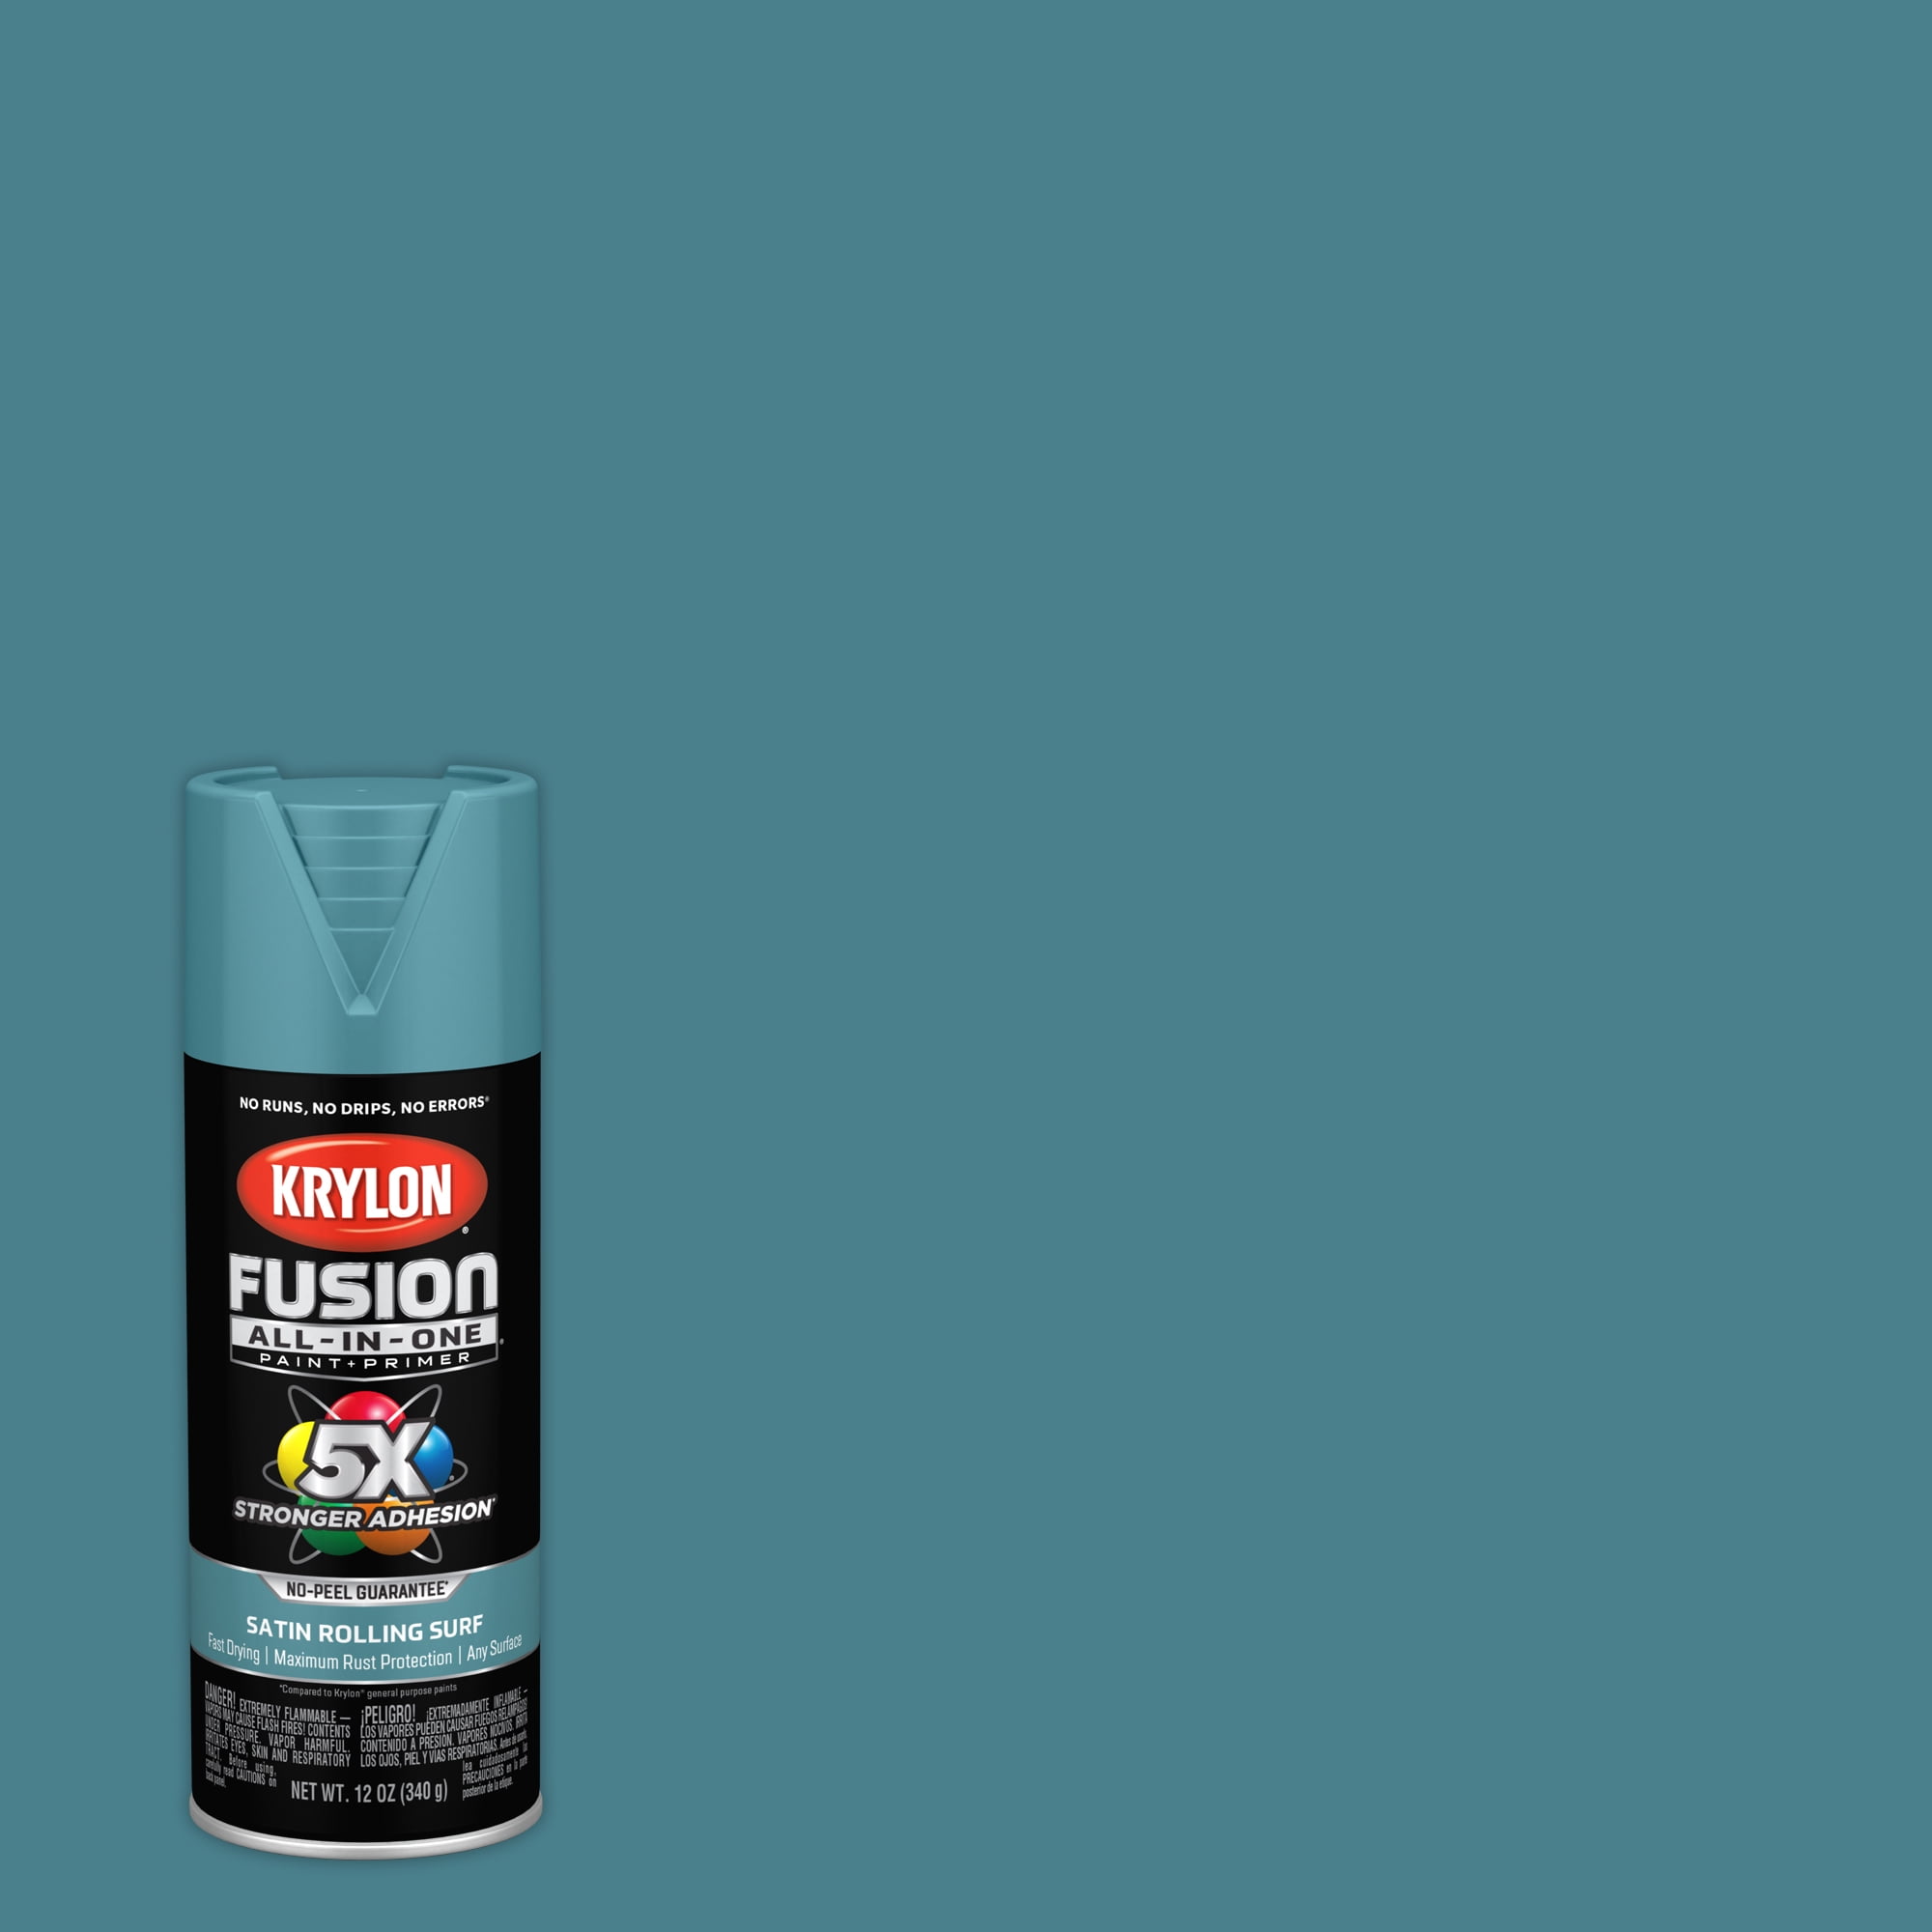 Krylon Fusion All-In-One 12 oz. Satin Spray Paint, Rolling Surf